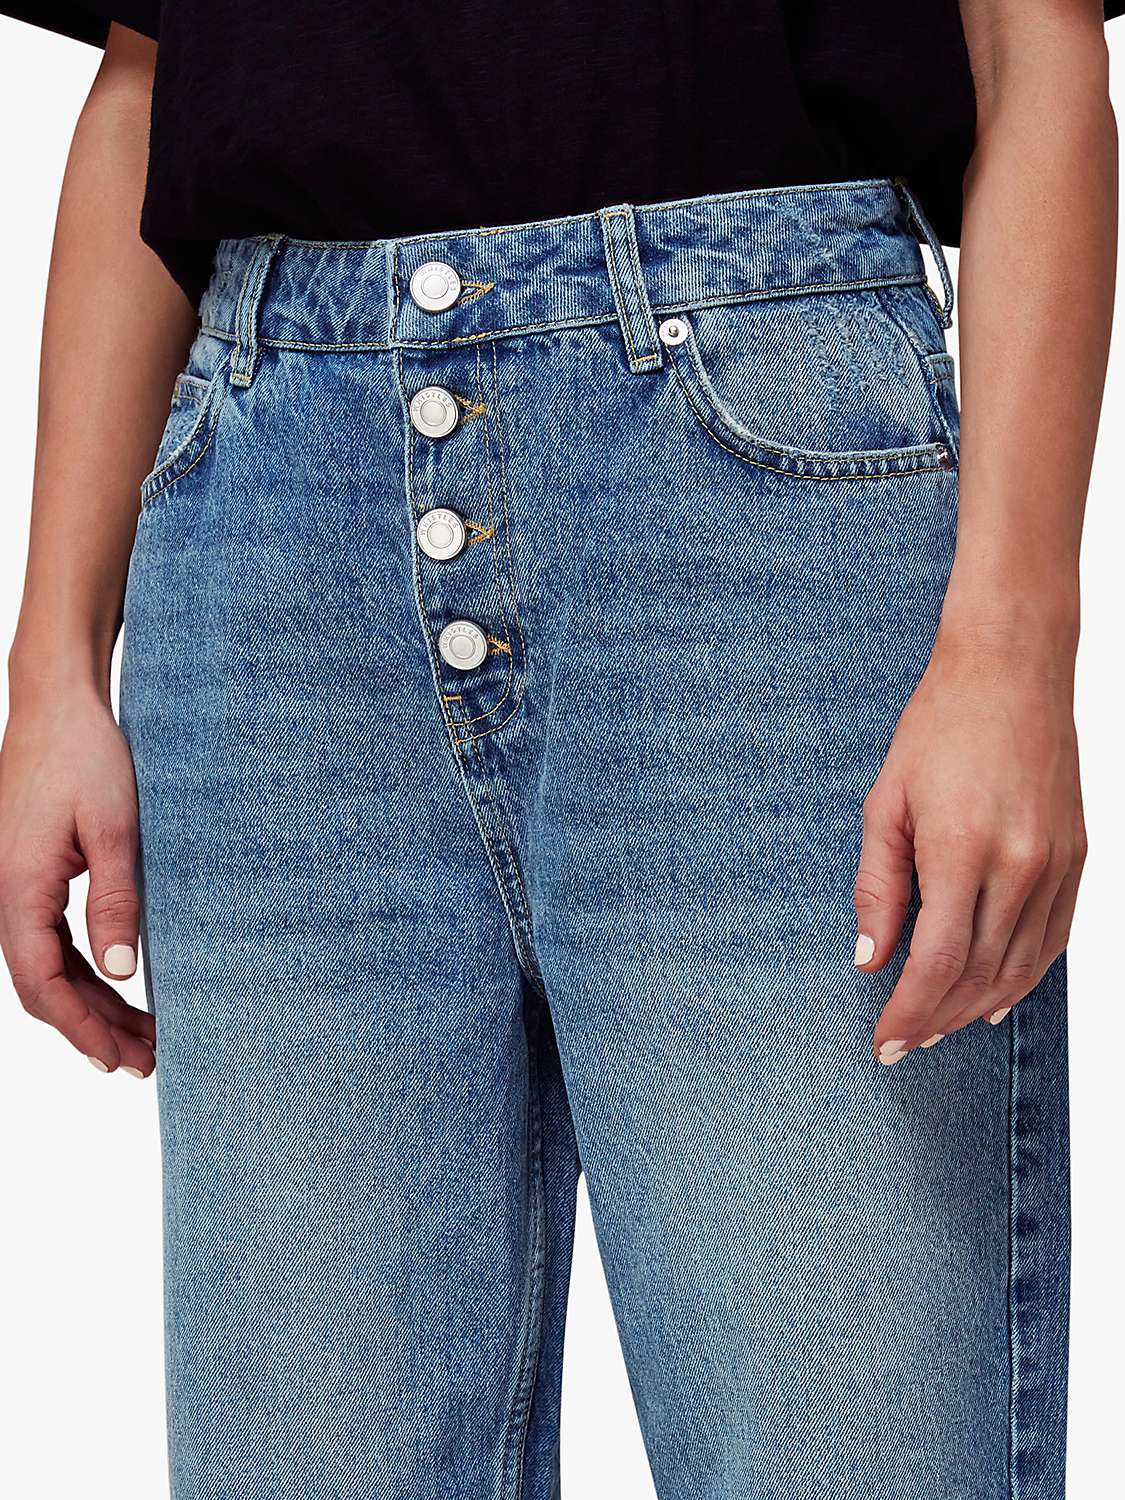 Buy Whistles Petite Authentic Hollie Button Jeans, Blue Online at johnlewis.com